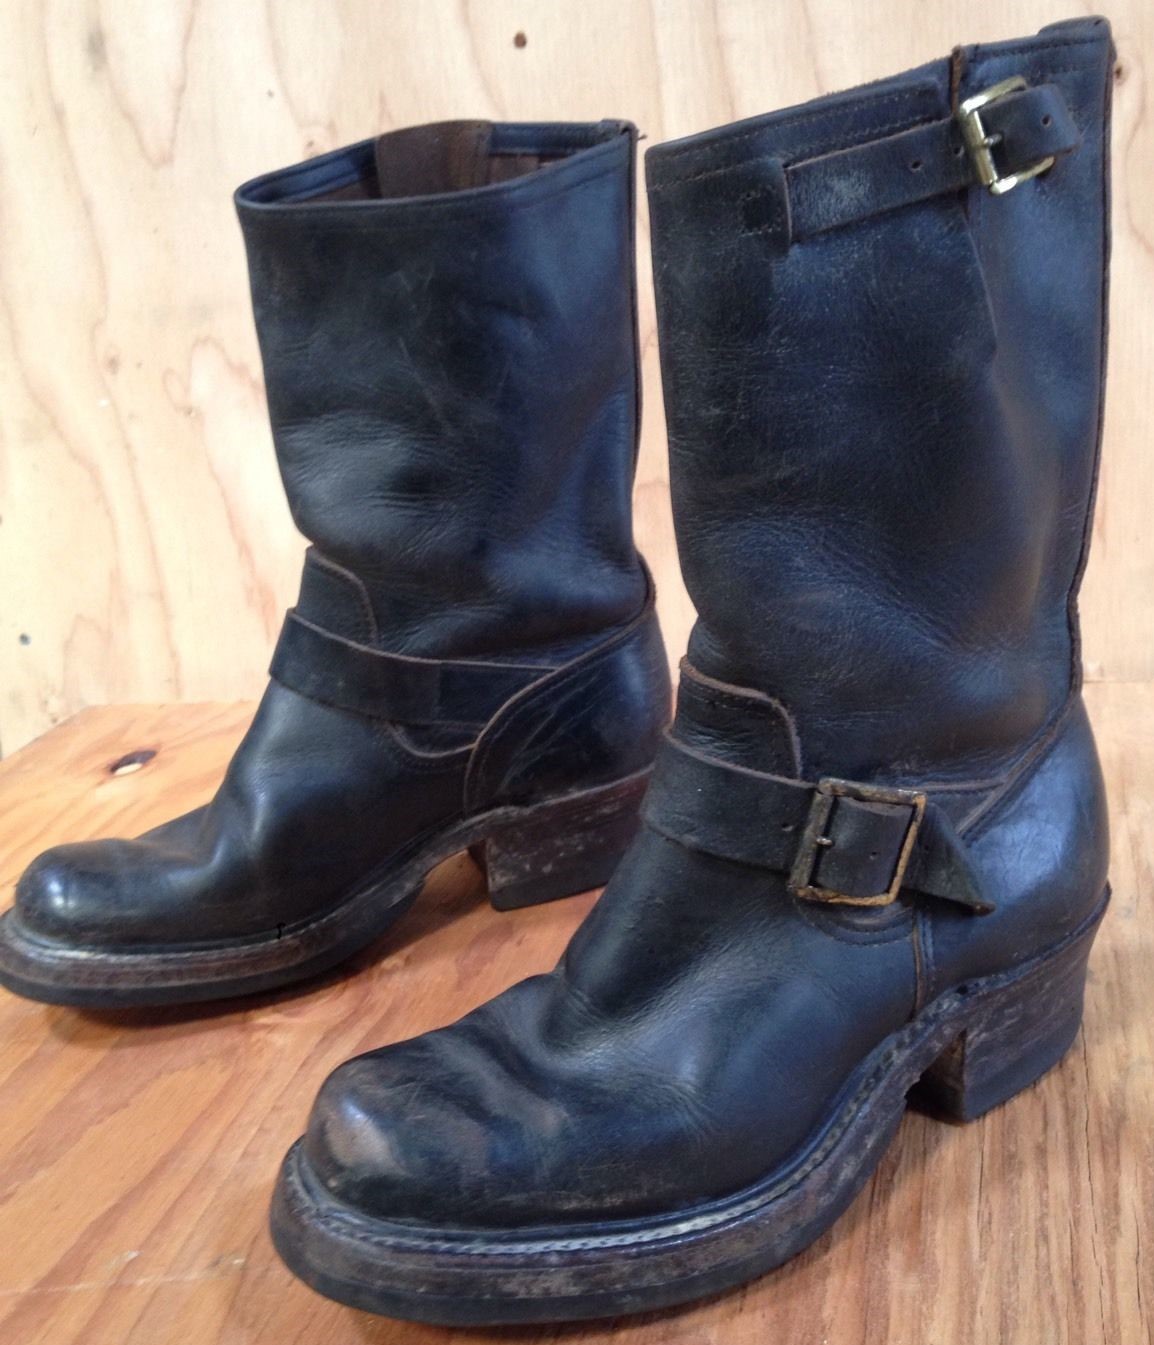 Vintage Engineer Boots: PENNEY'S FOREMOST ENGINEER BOOTS